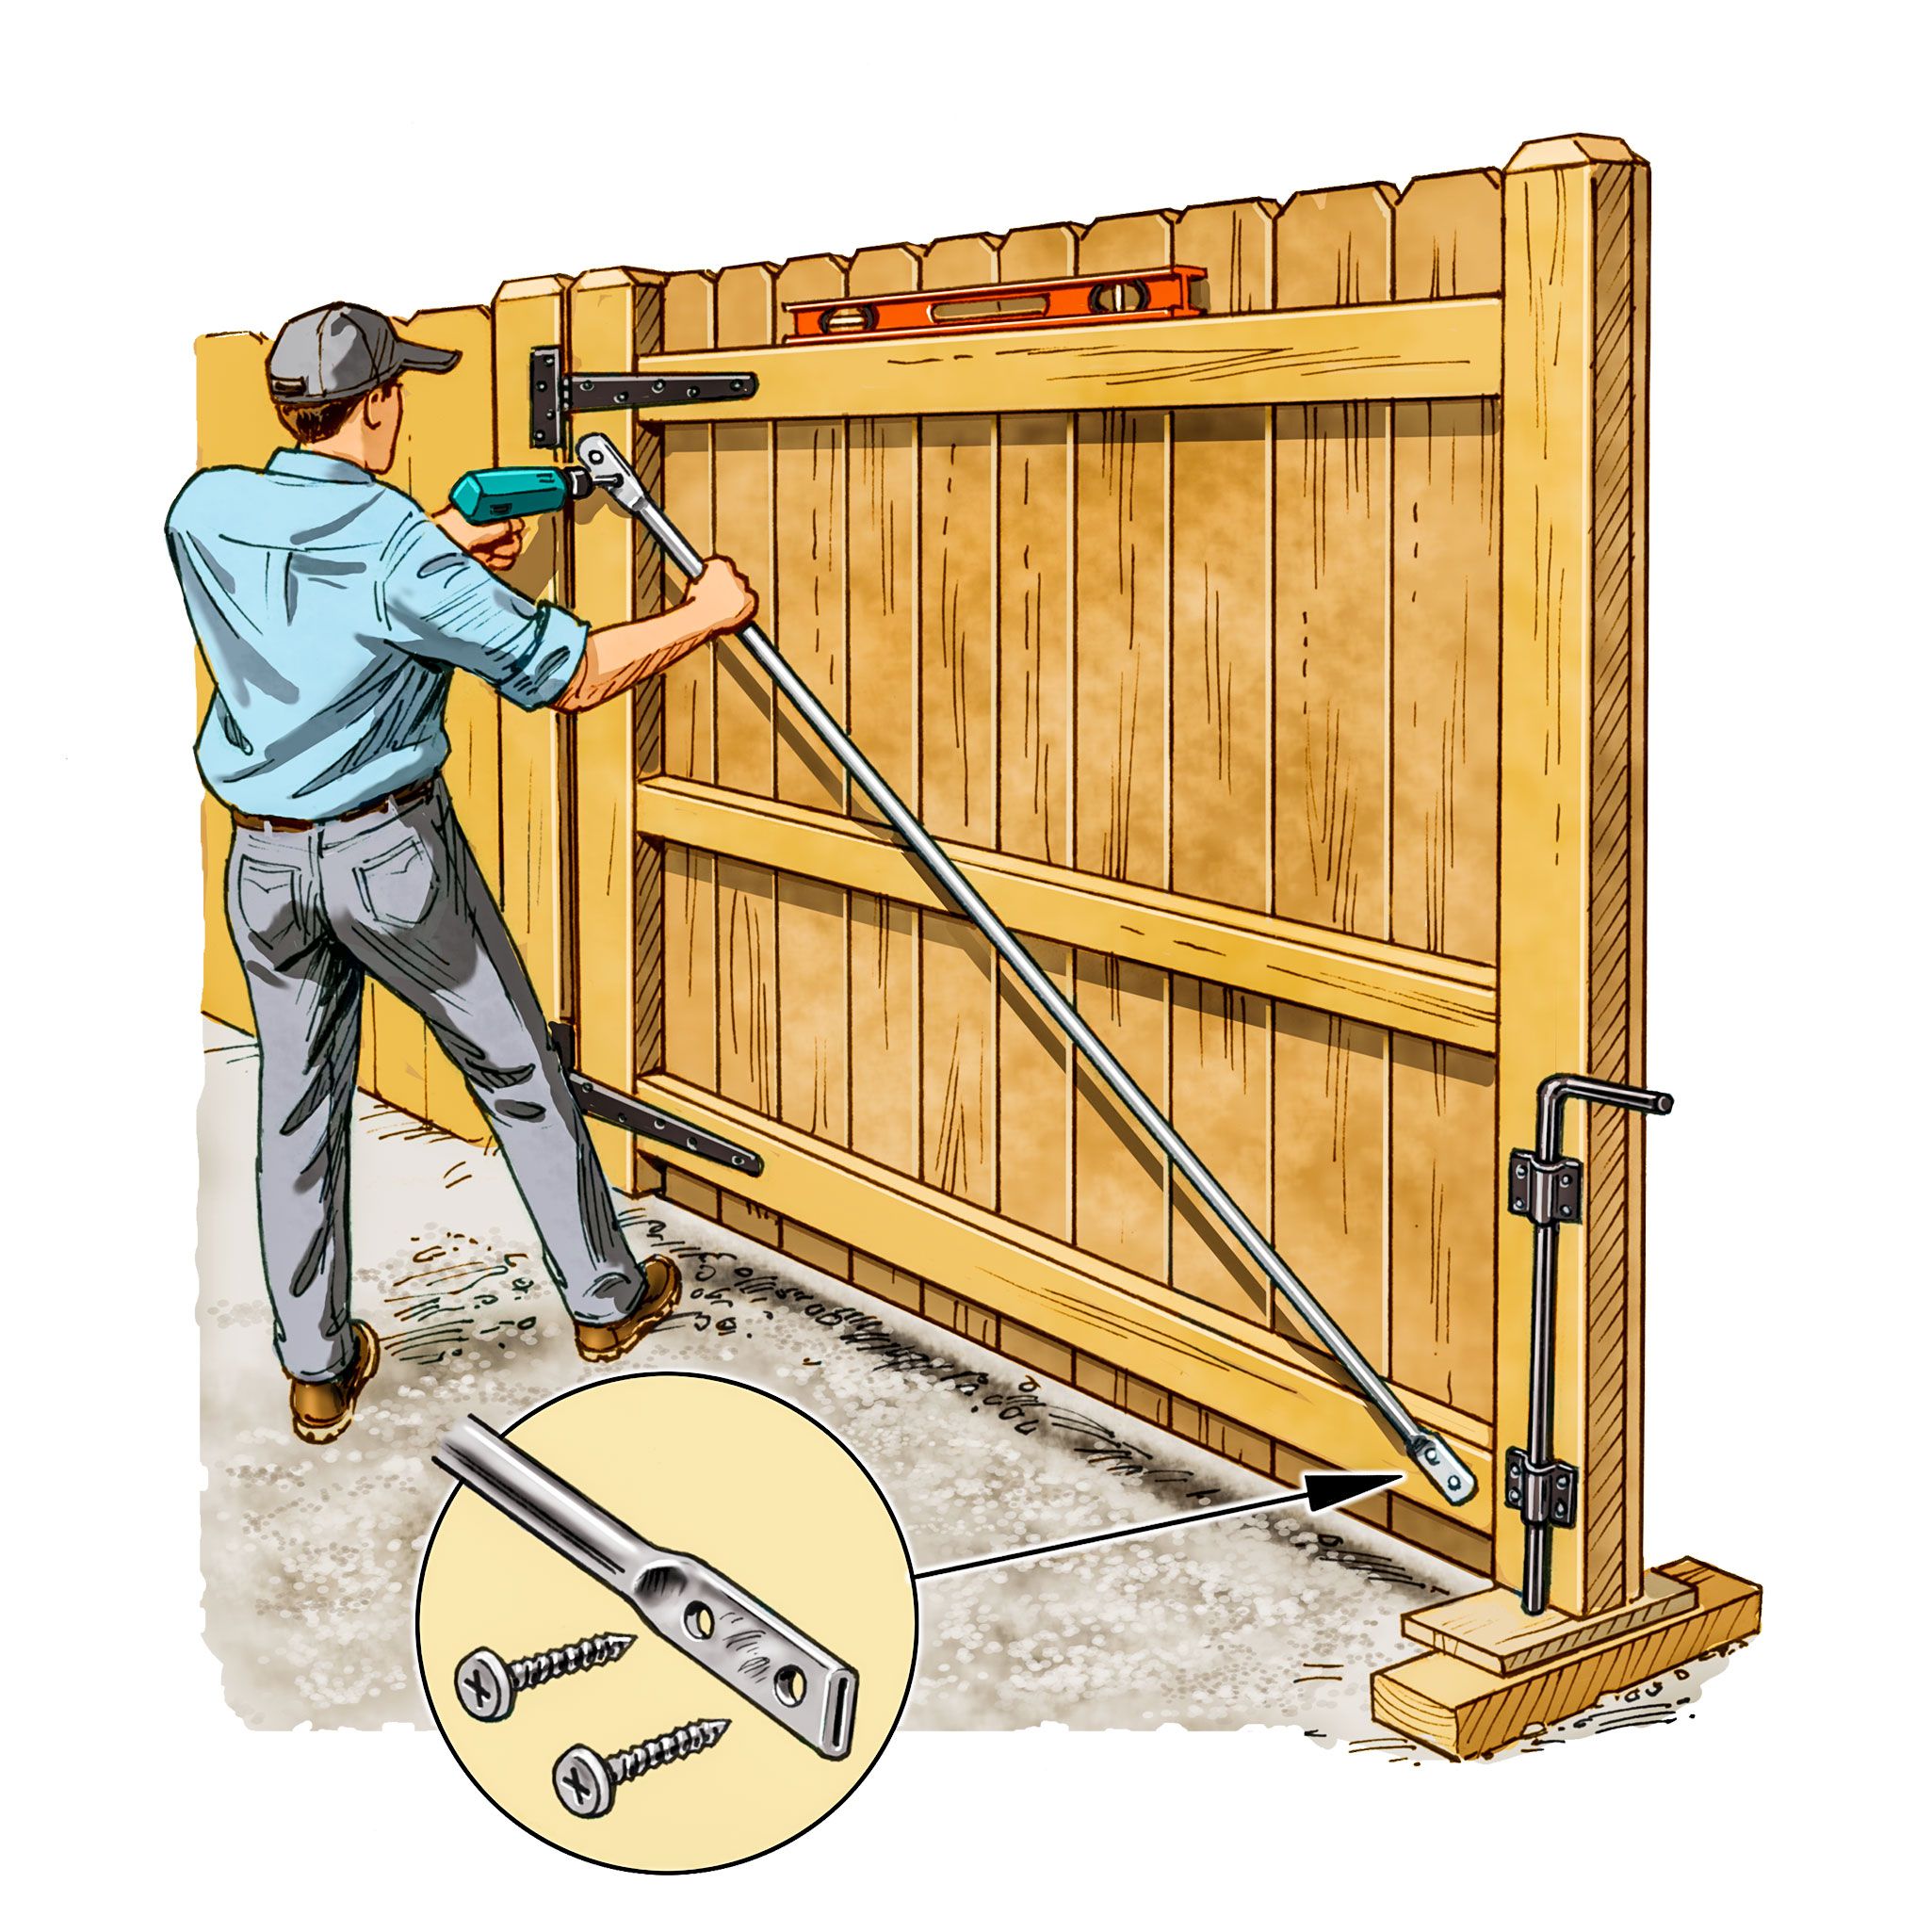 Do Repair Kits for Wood Gates Actually Work?